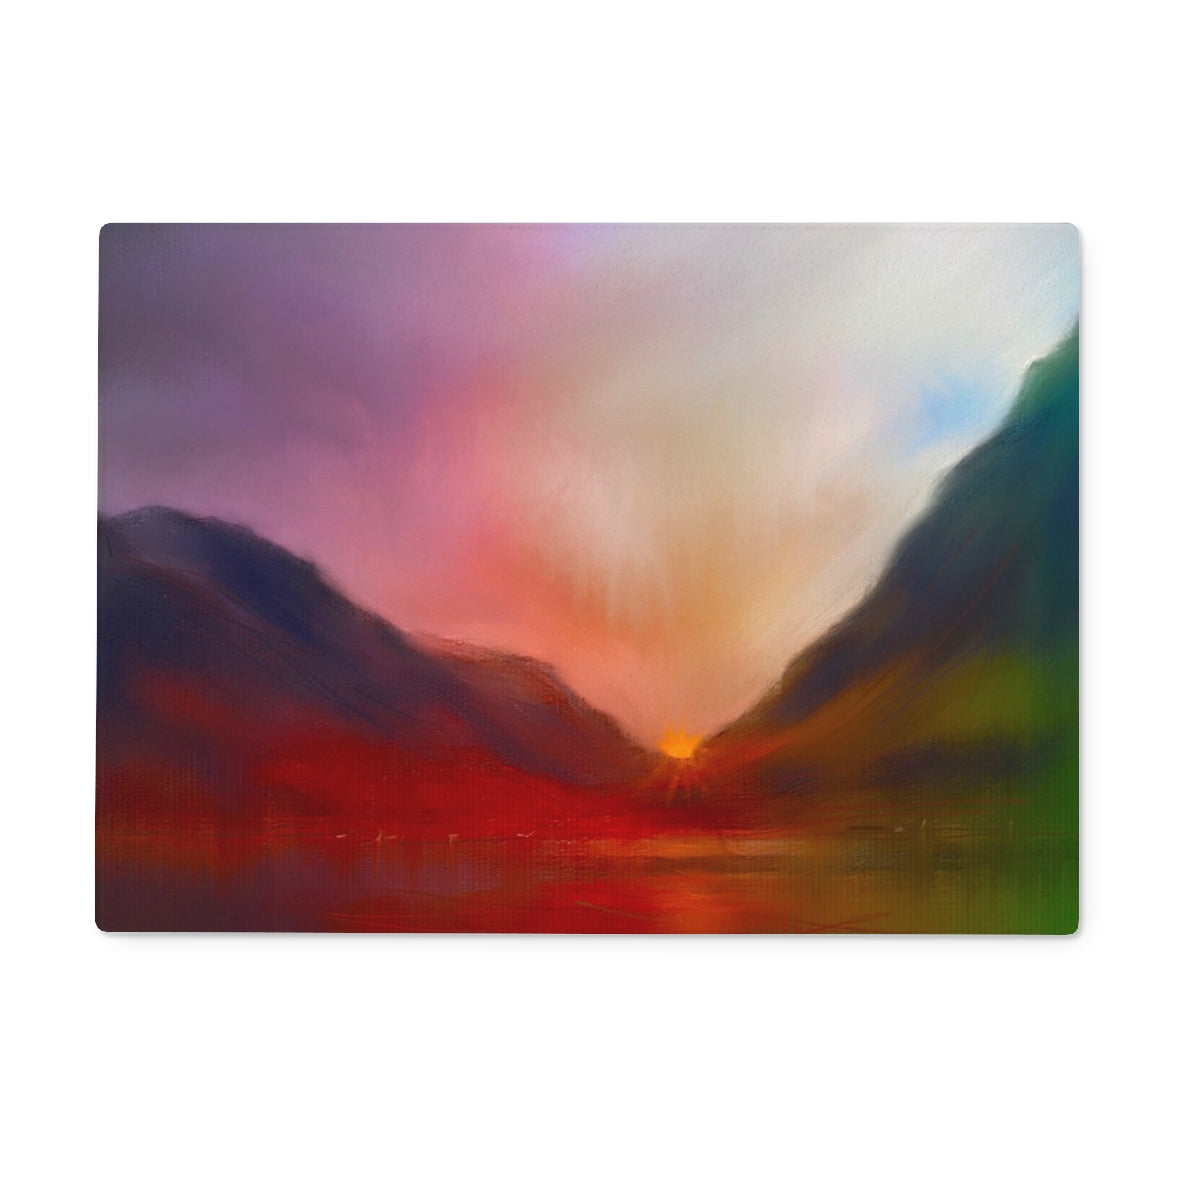 Glencoe Sunset Art Gifts Glass Chopping Board-Glass Chopping Boards-Glencoe Art Gallery-15"x11" Rectangular-Paintings, Prints, Homeware, Art Gifts From Scotland By Scottish Artist Kevin Hunter